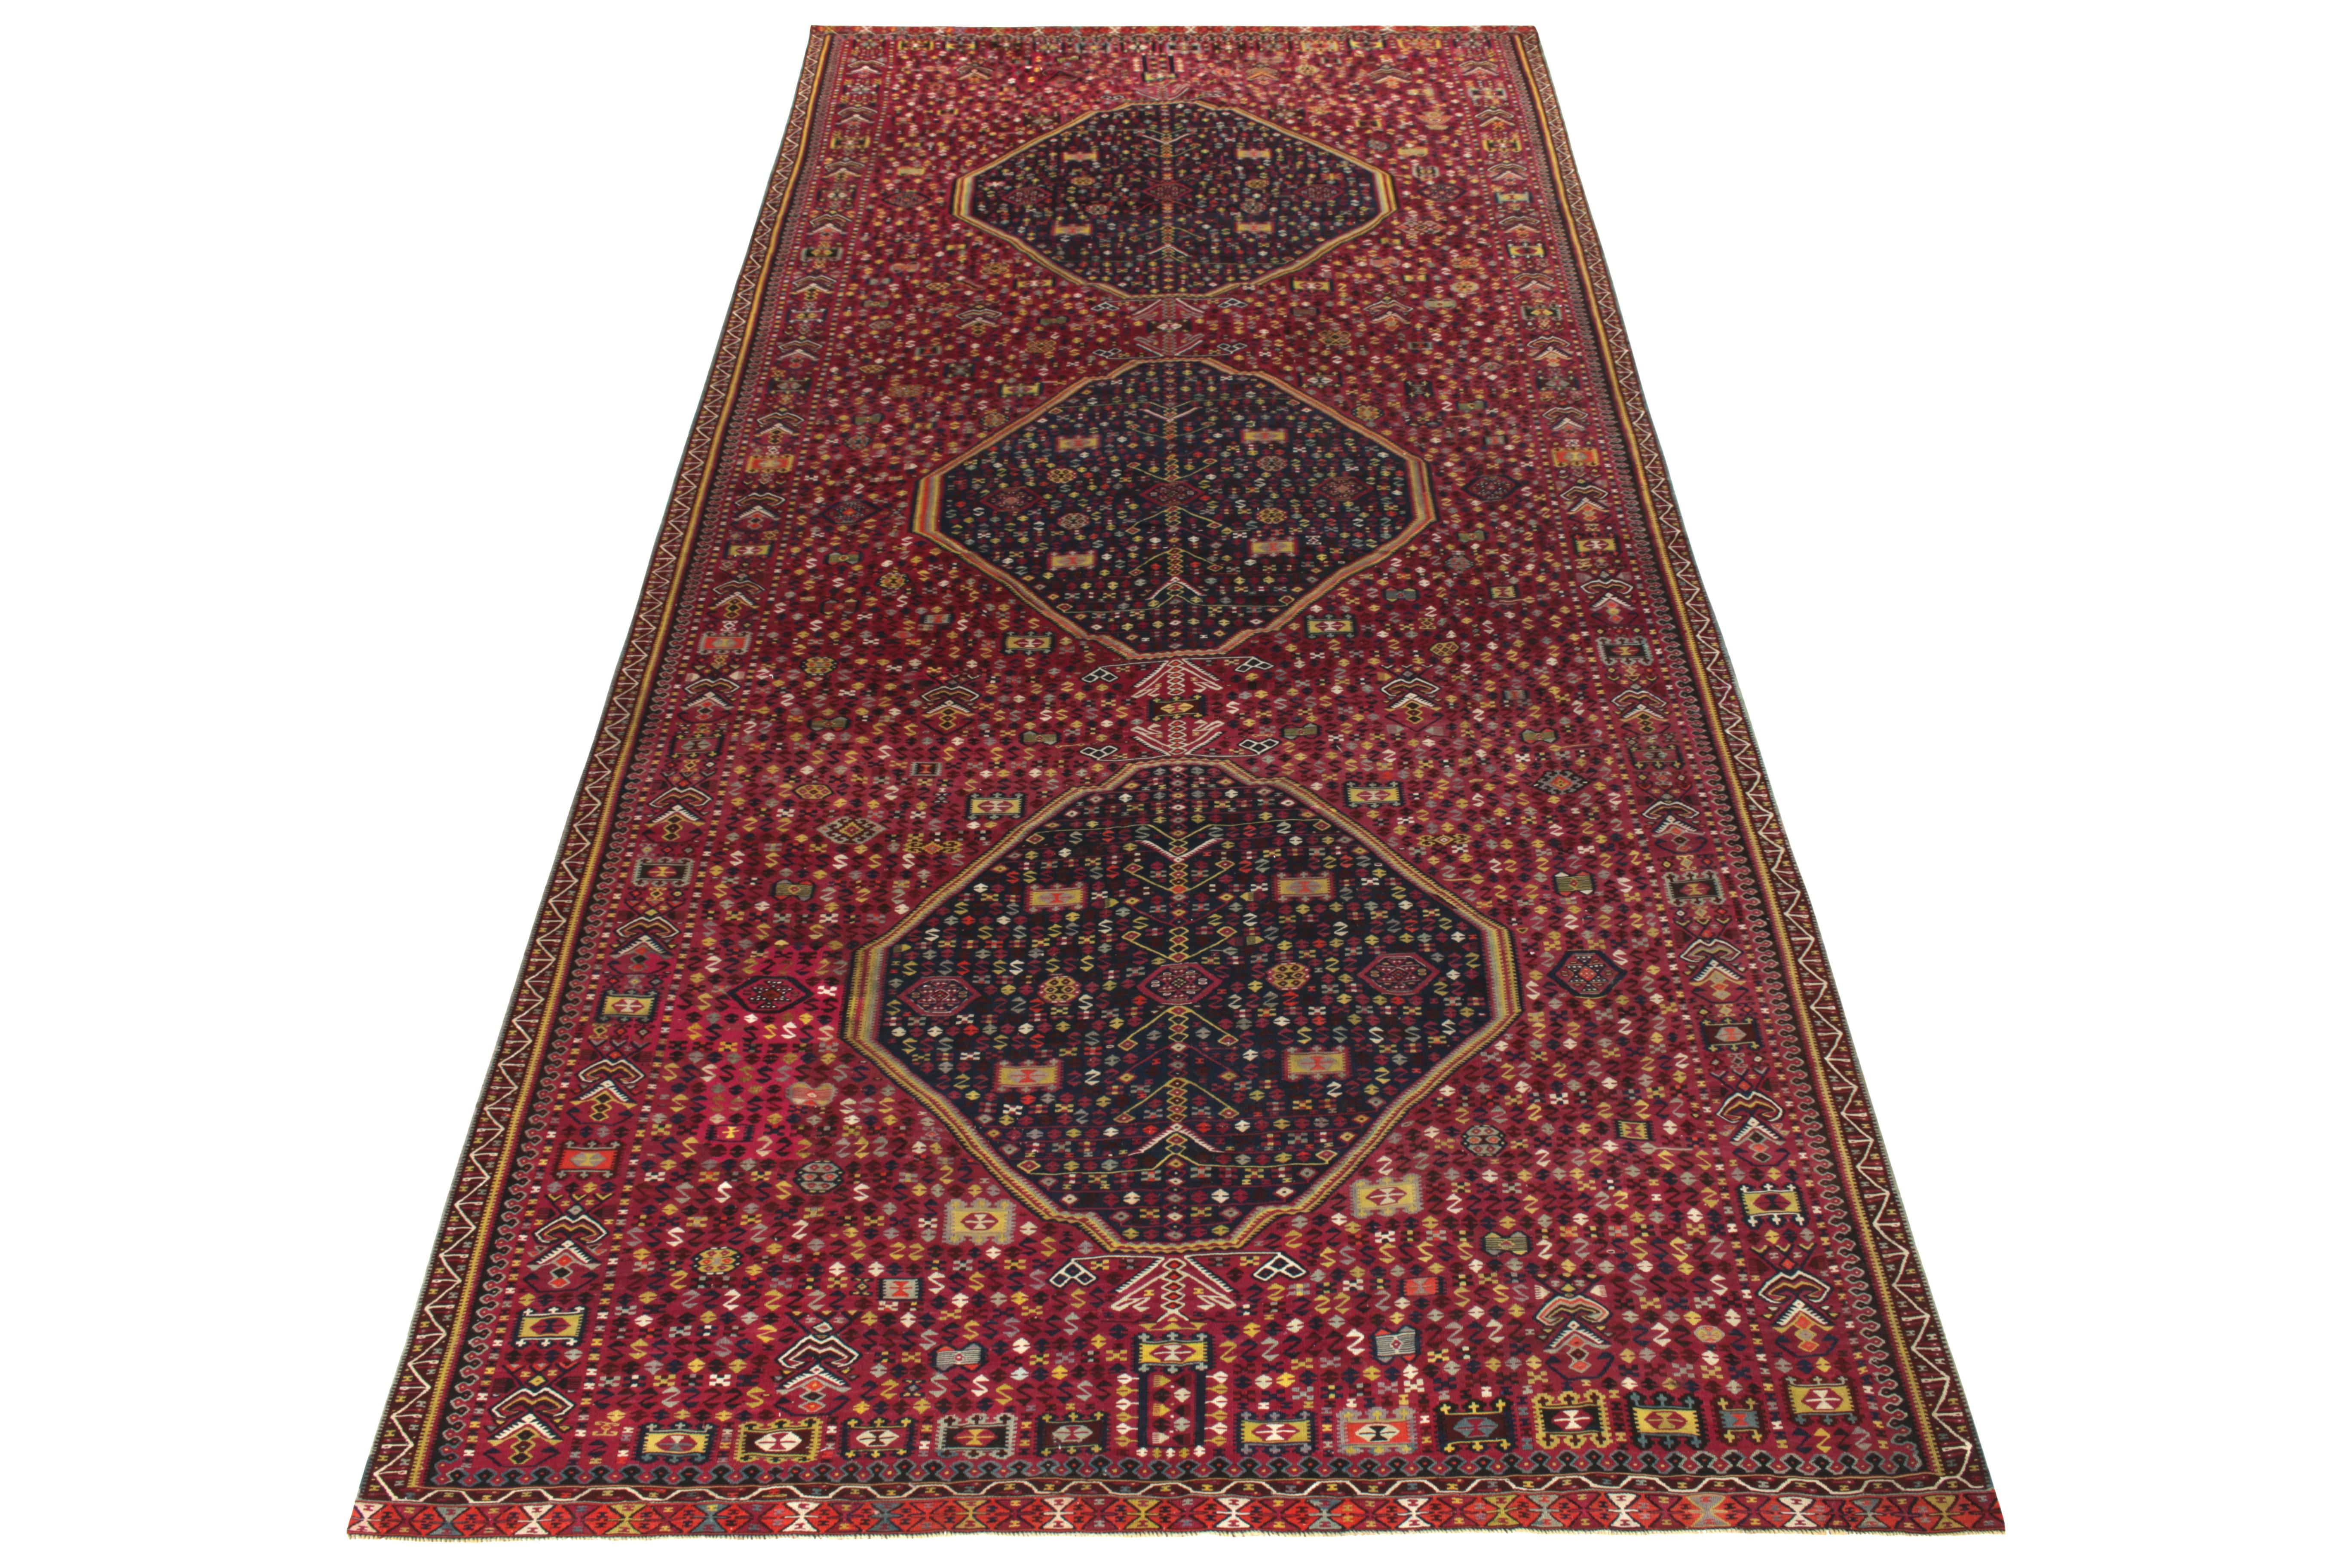 A rare gallery size vintage kilim rug originating from Turkey circa 1950-1960. The classic rendering carries an archaic demeanor in a luscious maroon and royal blue geometric pattern—exemplifying the celebrated Turkish aesthetics that manifest as